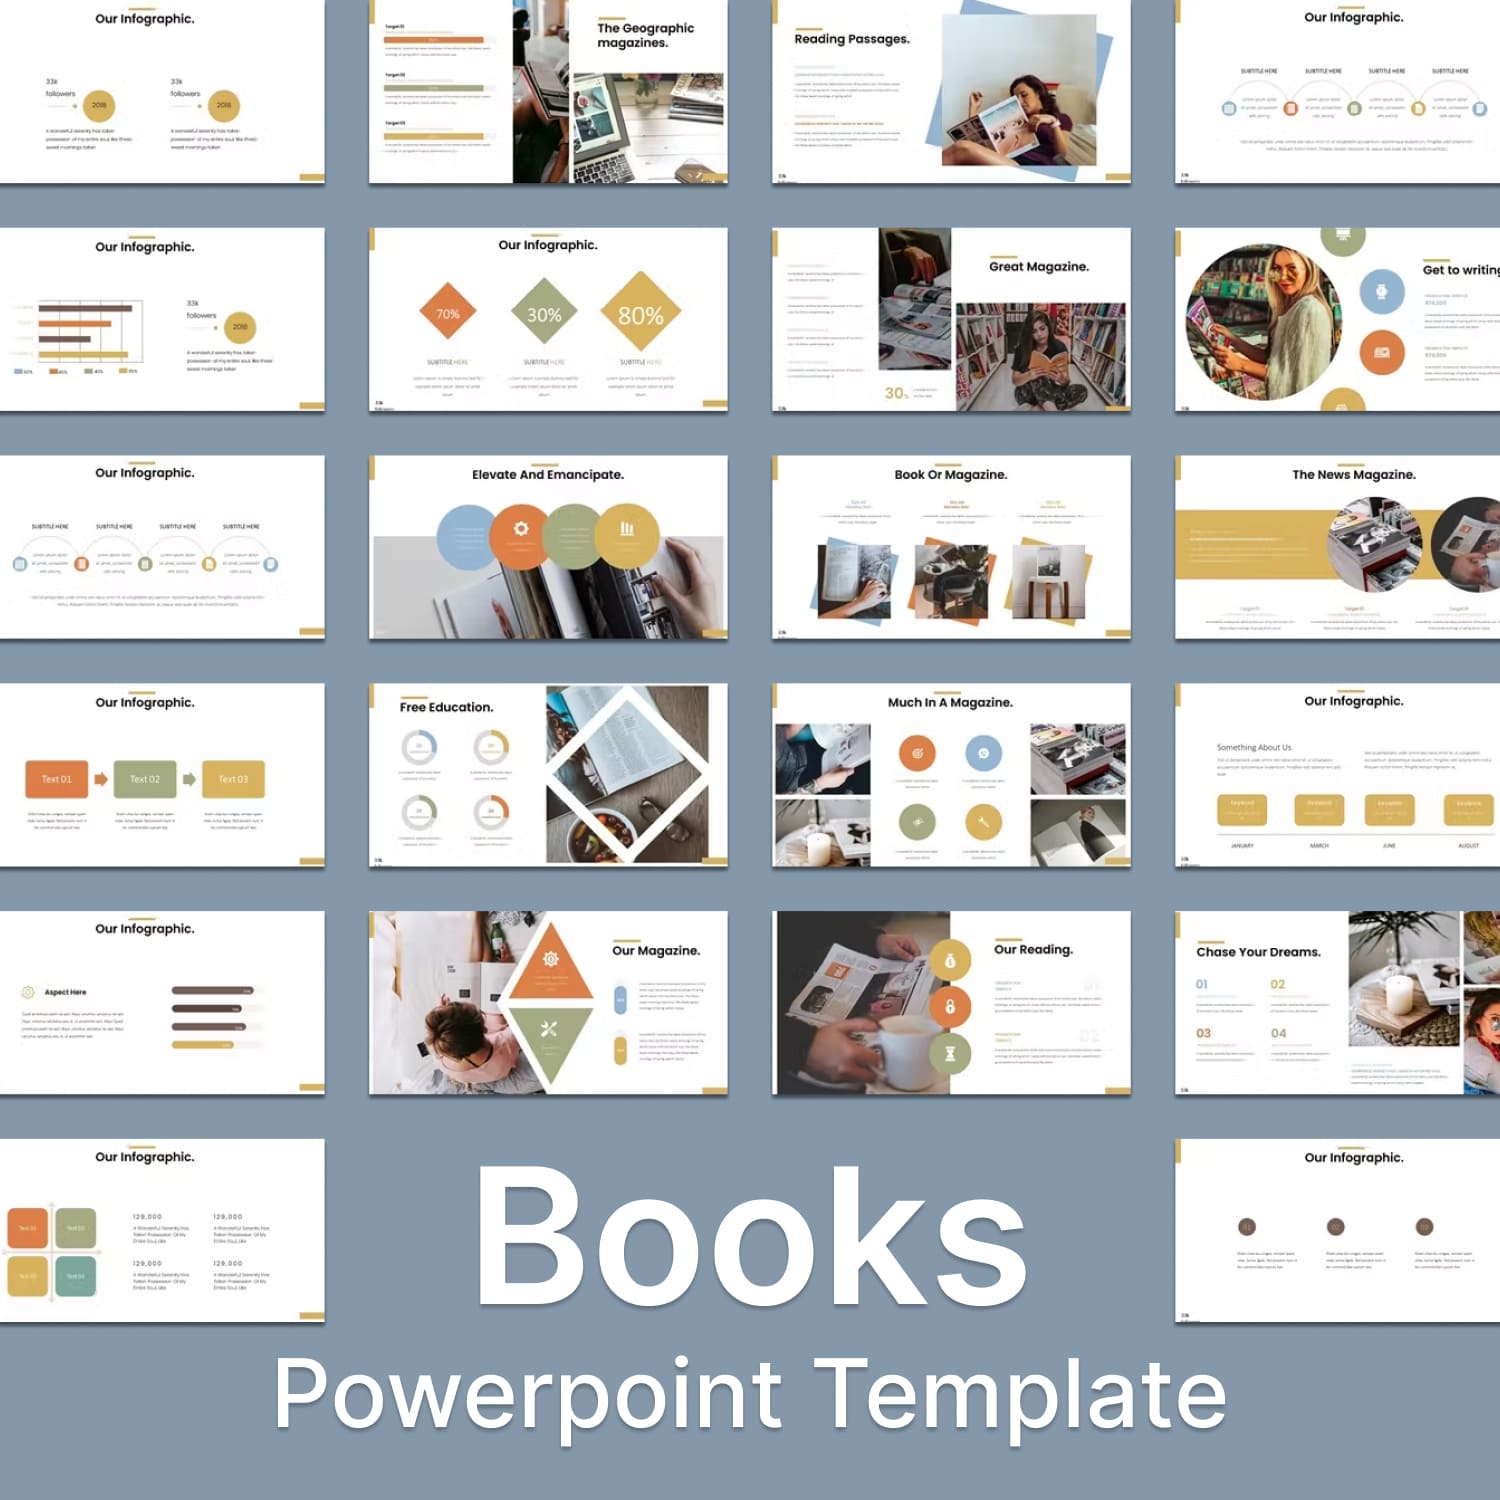 Books powerpoint template - main image preview.